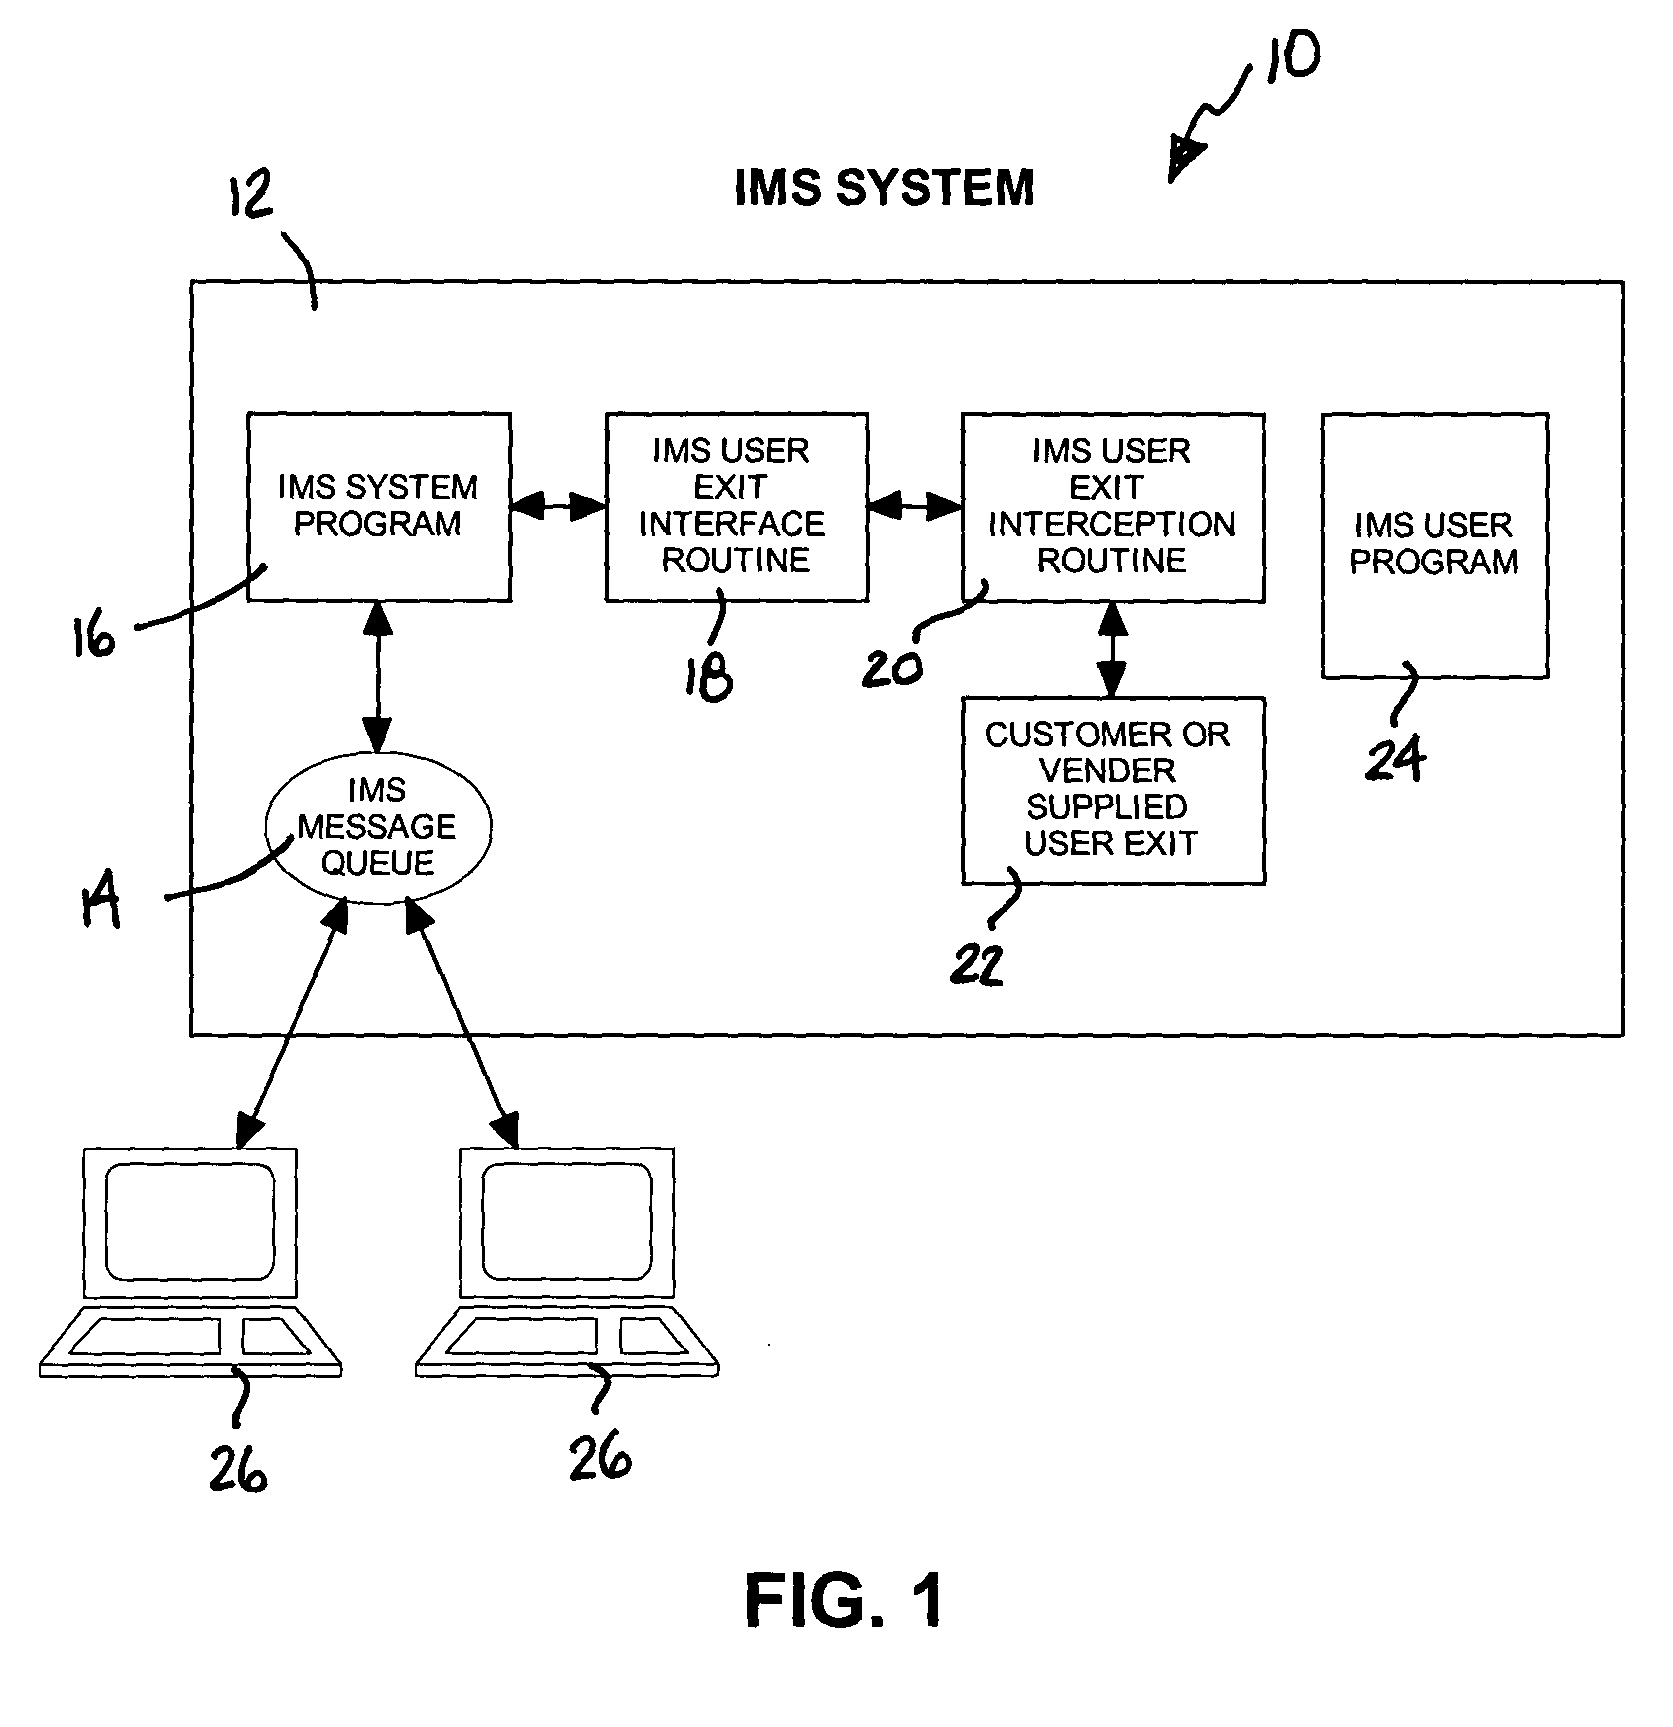 System and method for intercepting user exit interfaces in IMS programs